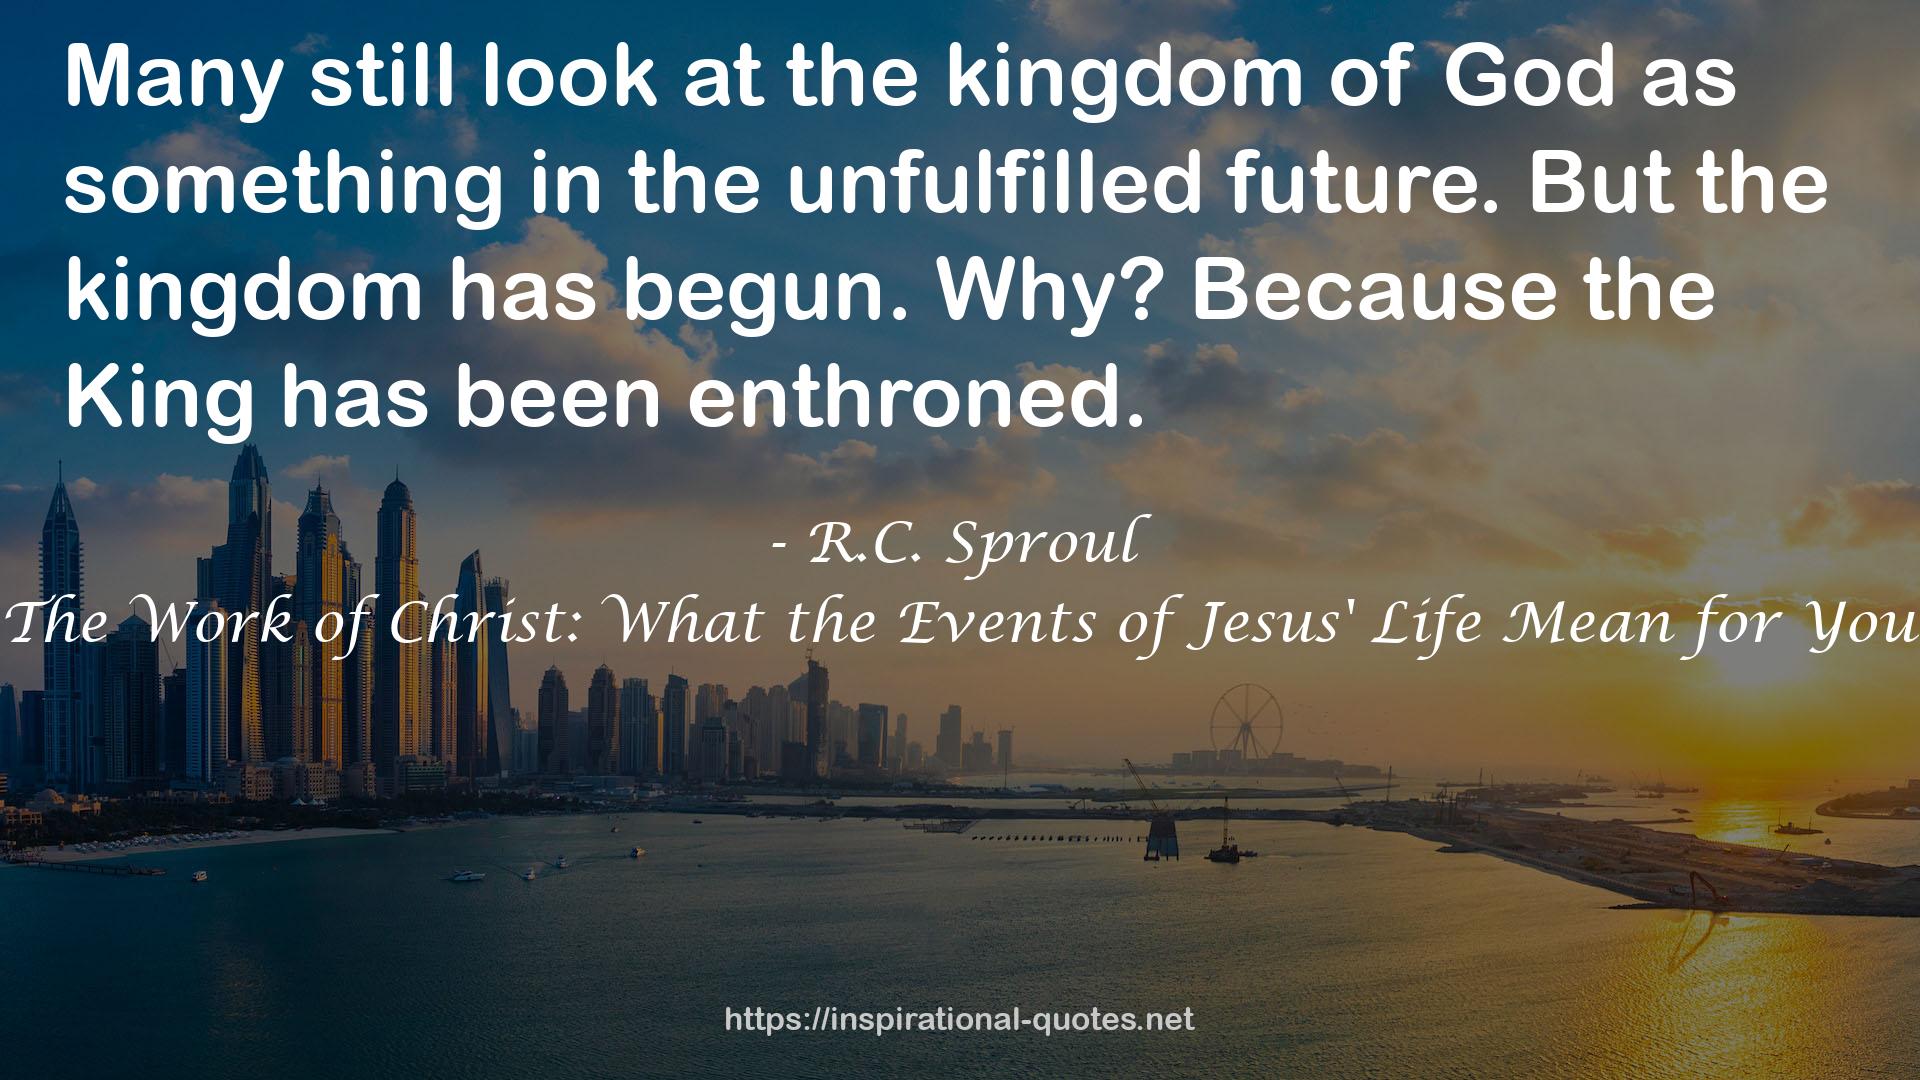 The Work of Christ: What the Events of Jesus' Life Mean for You QUOTES